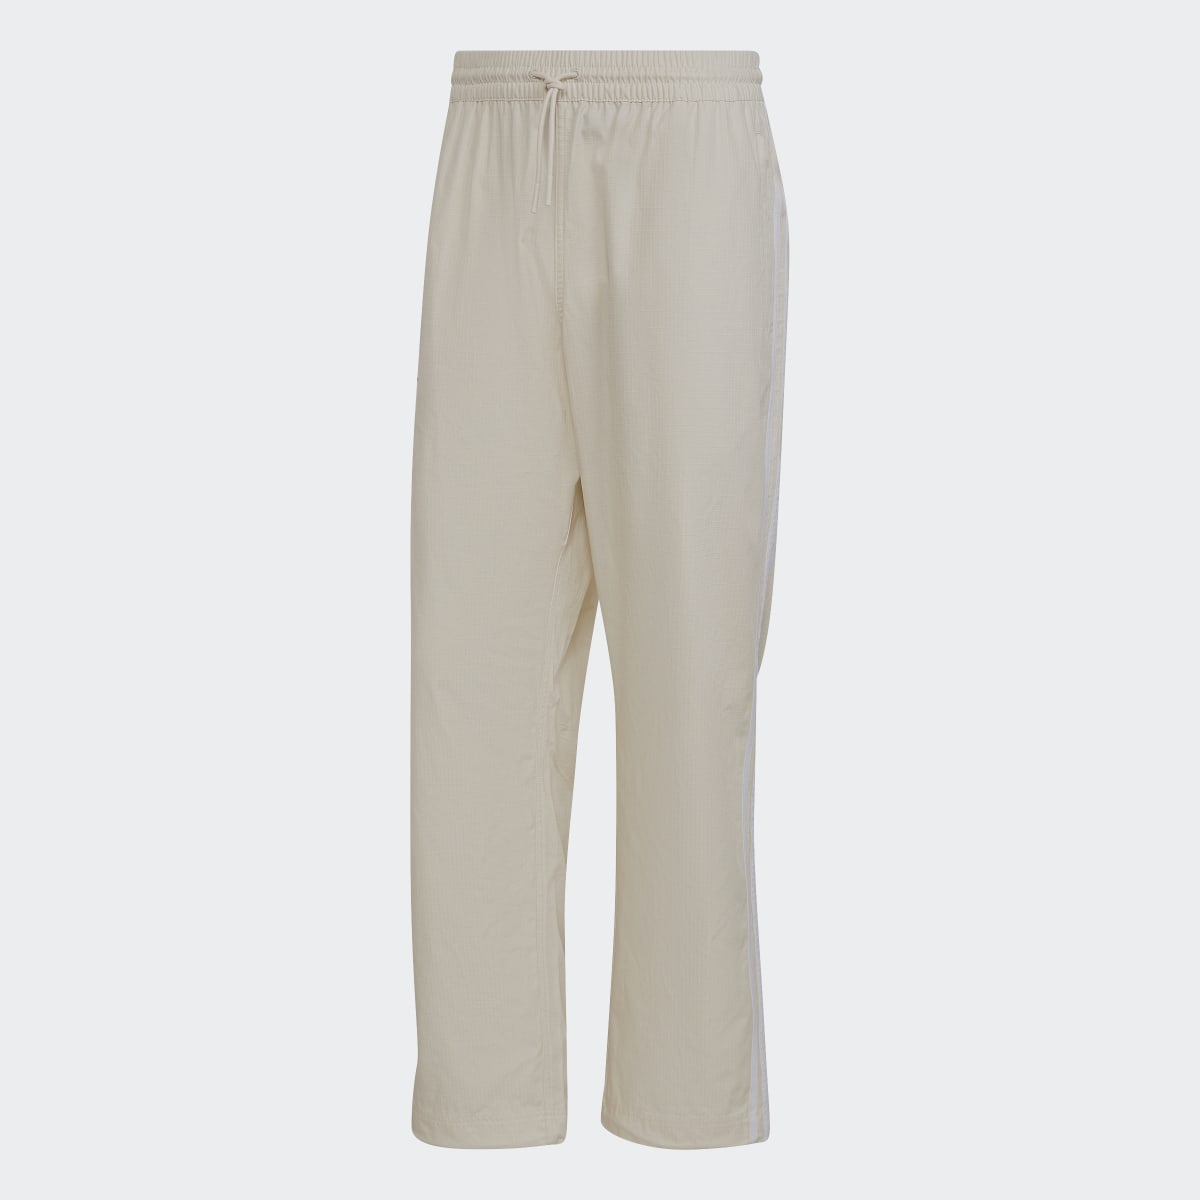 Adidas Work Trousers. 4